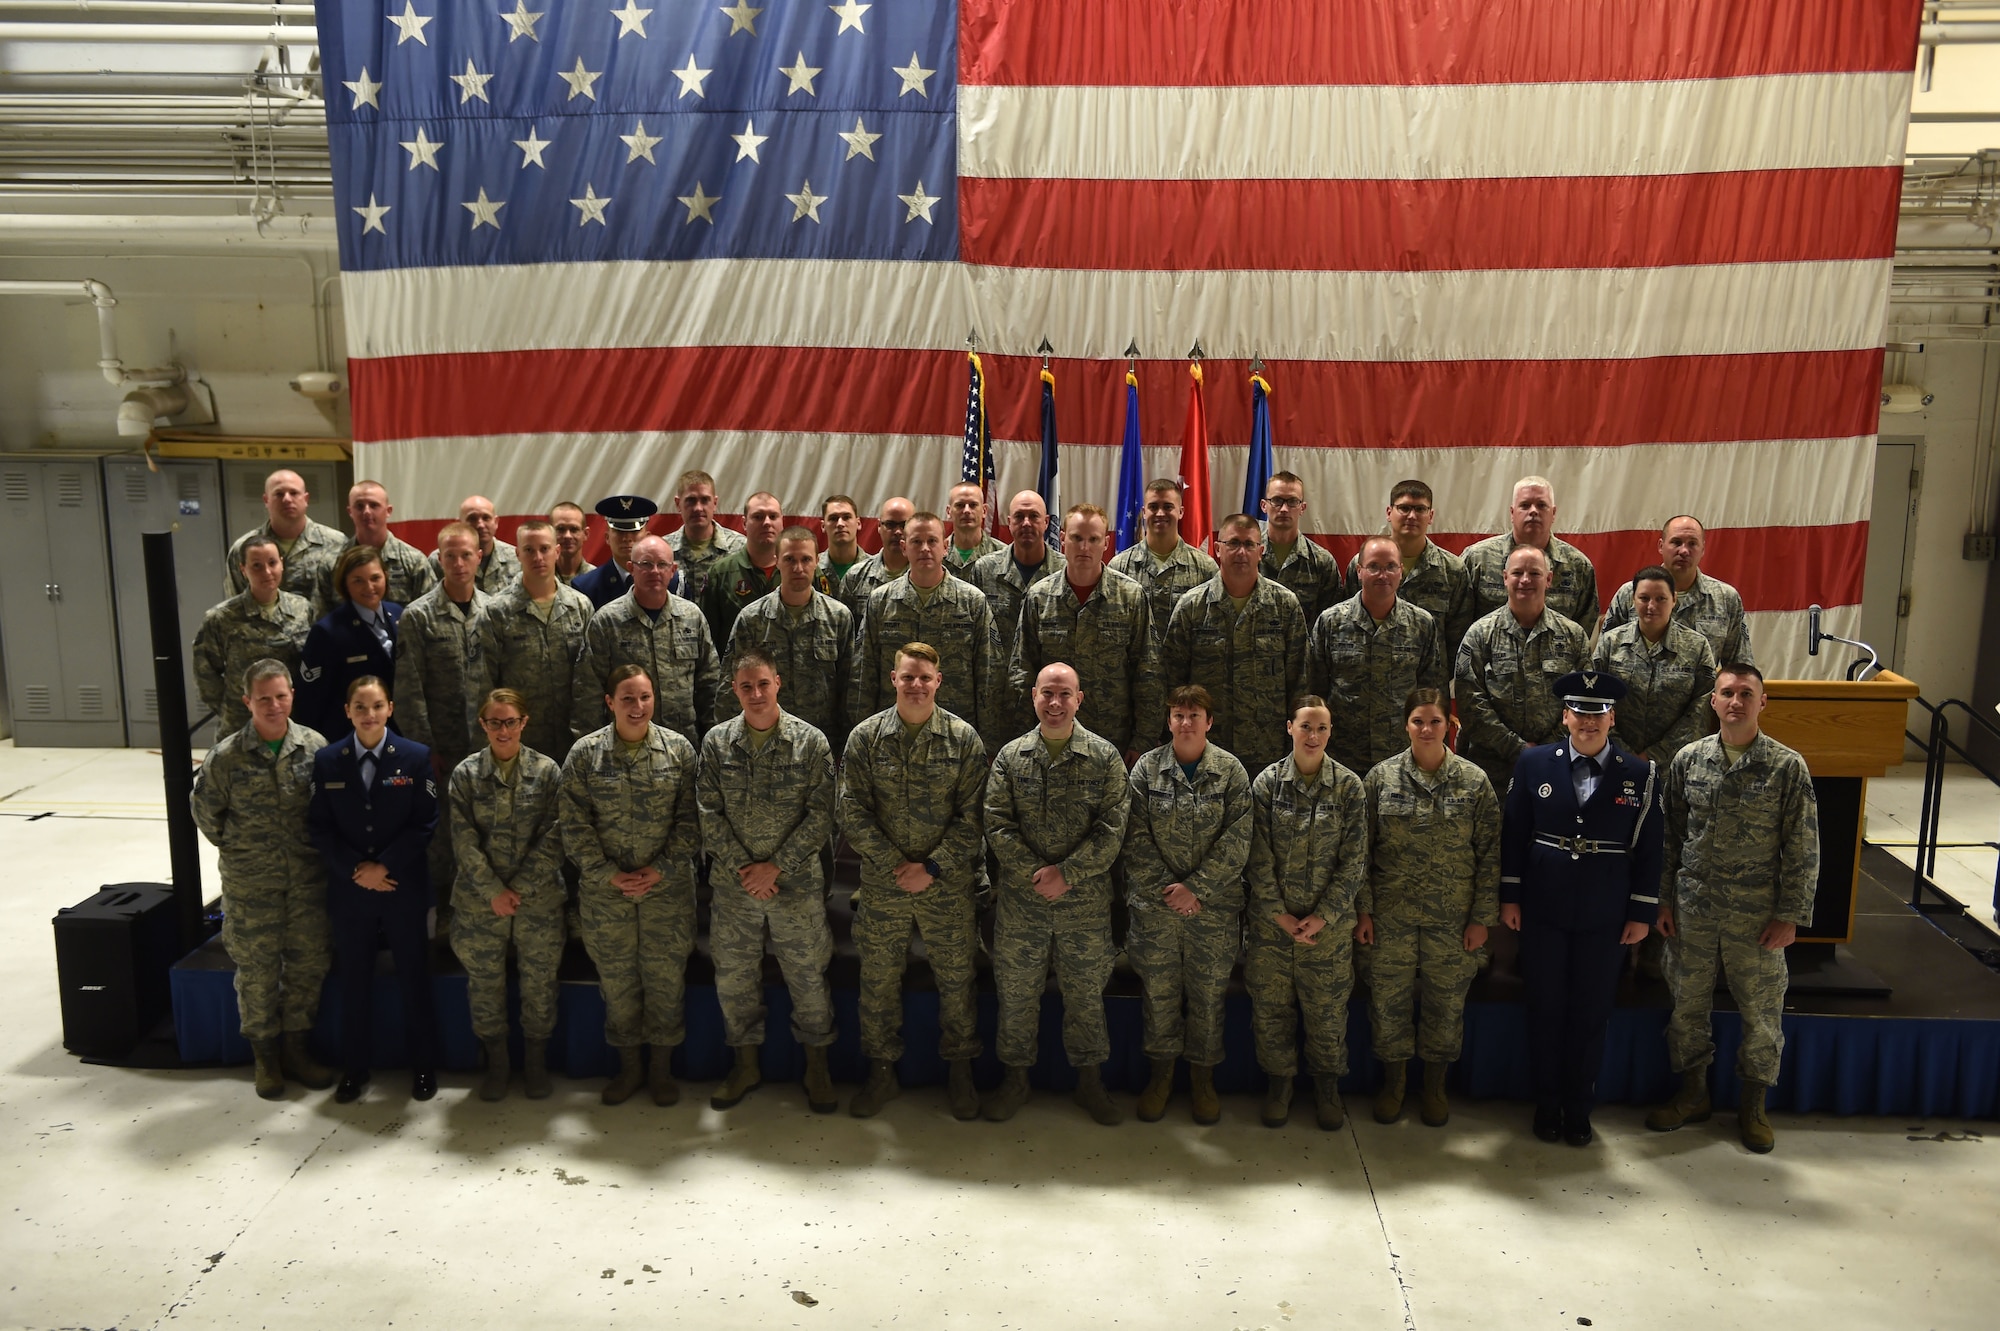 132d Wing Community College of the Air Force (CCAF) degree recipients pose for a photo during the 2016 end of year awards November 5, 2016, at the Des Moines Air Base, Iowa. The 132d Wing has been number one in CCAF degrees in the entire Air National Guard the past two years. (U.S. Air National Guard photo by Staff Sgt. Michael. J. Kelly)